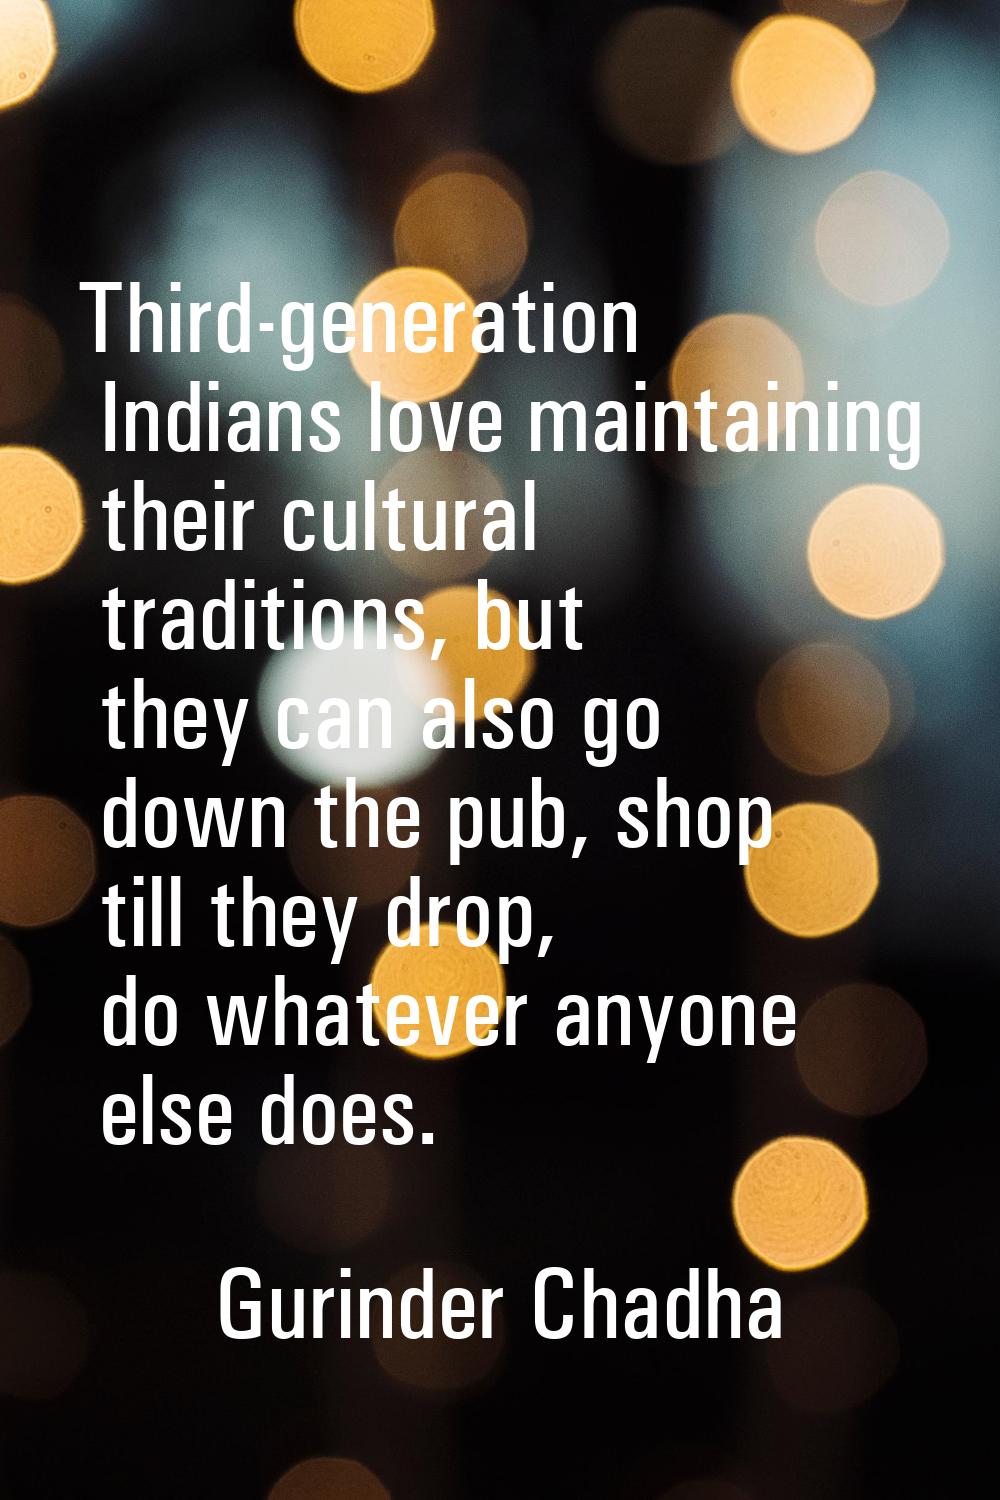 Third-generation Indians love maintaining their cultural traditions, but they can also go down the 